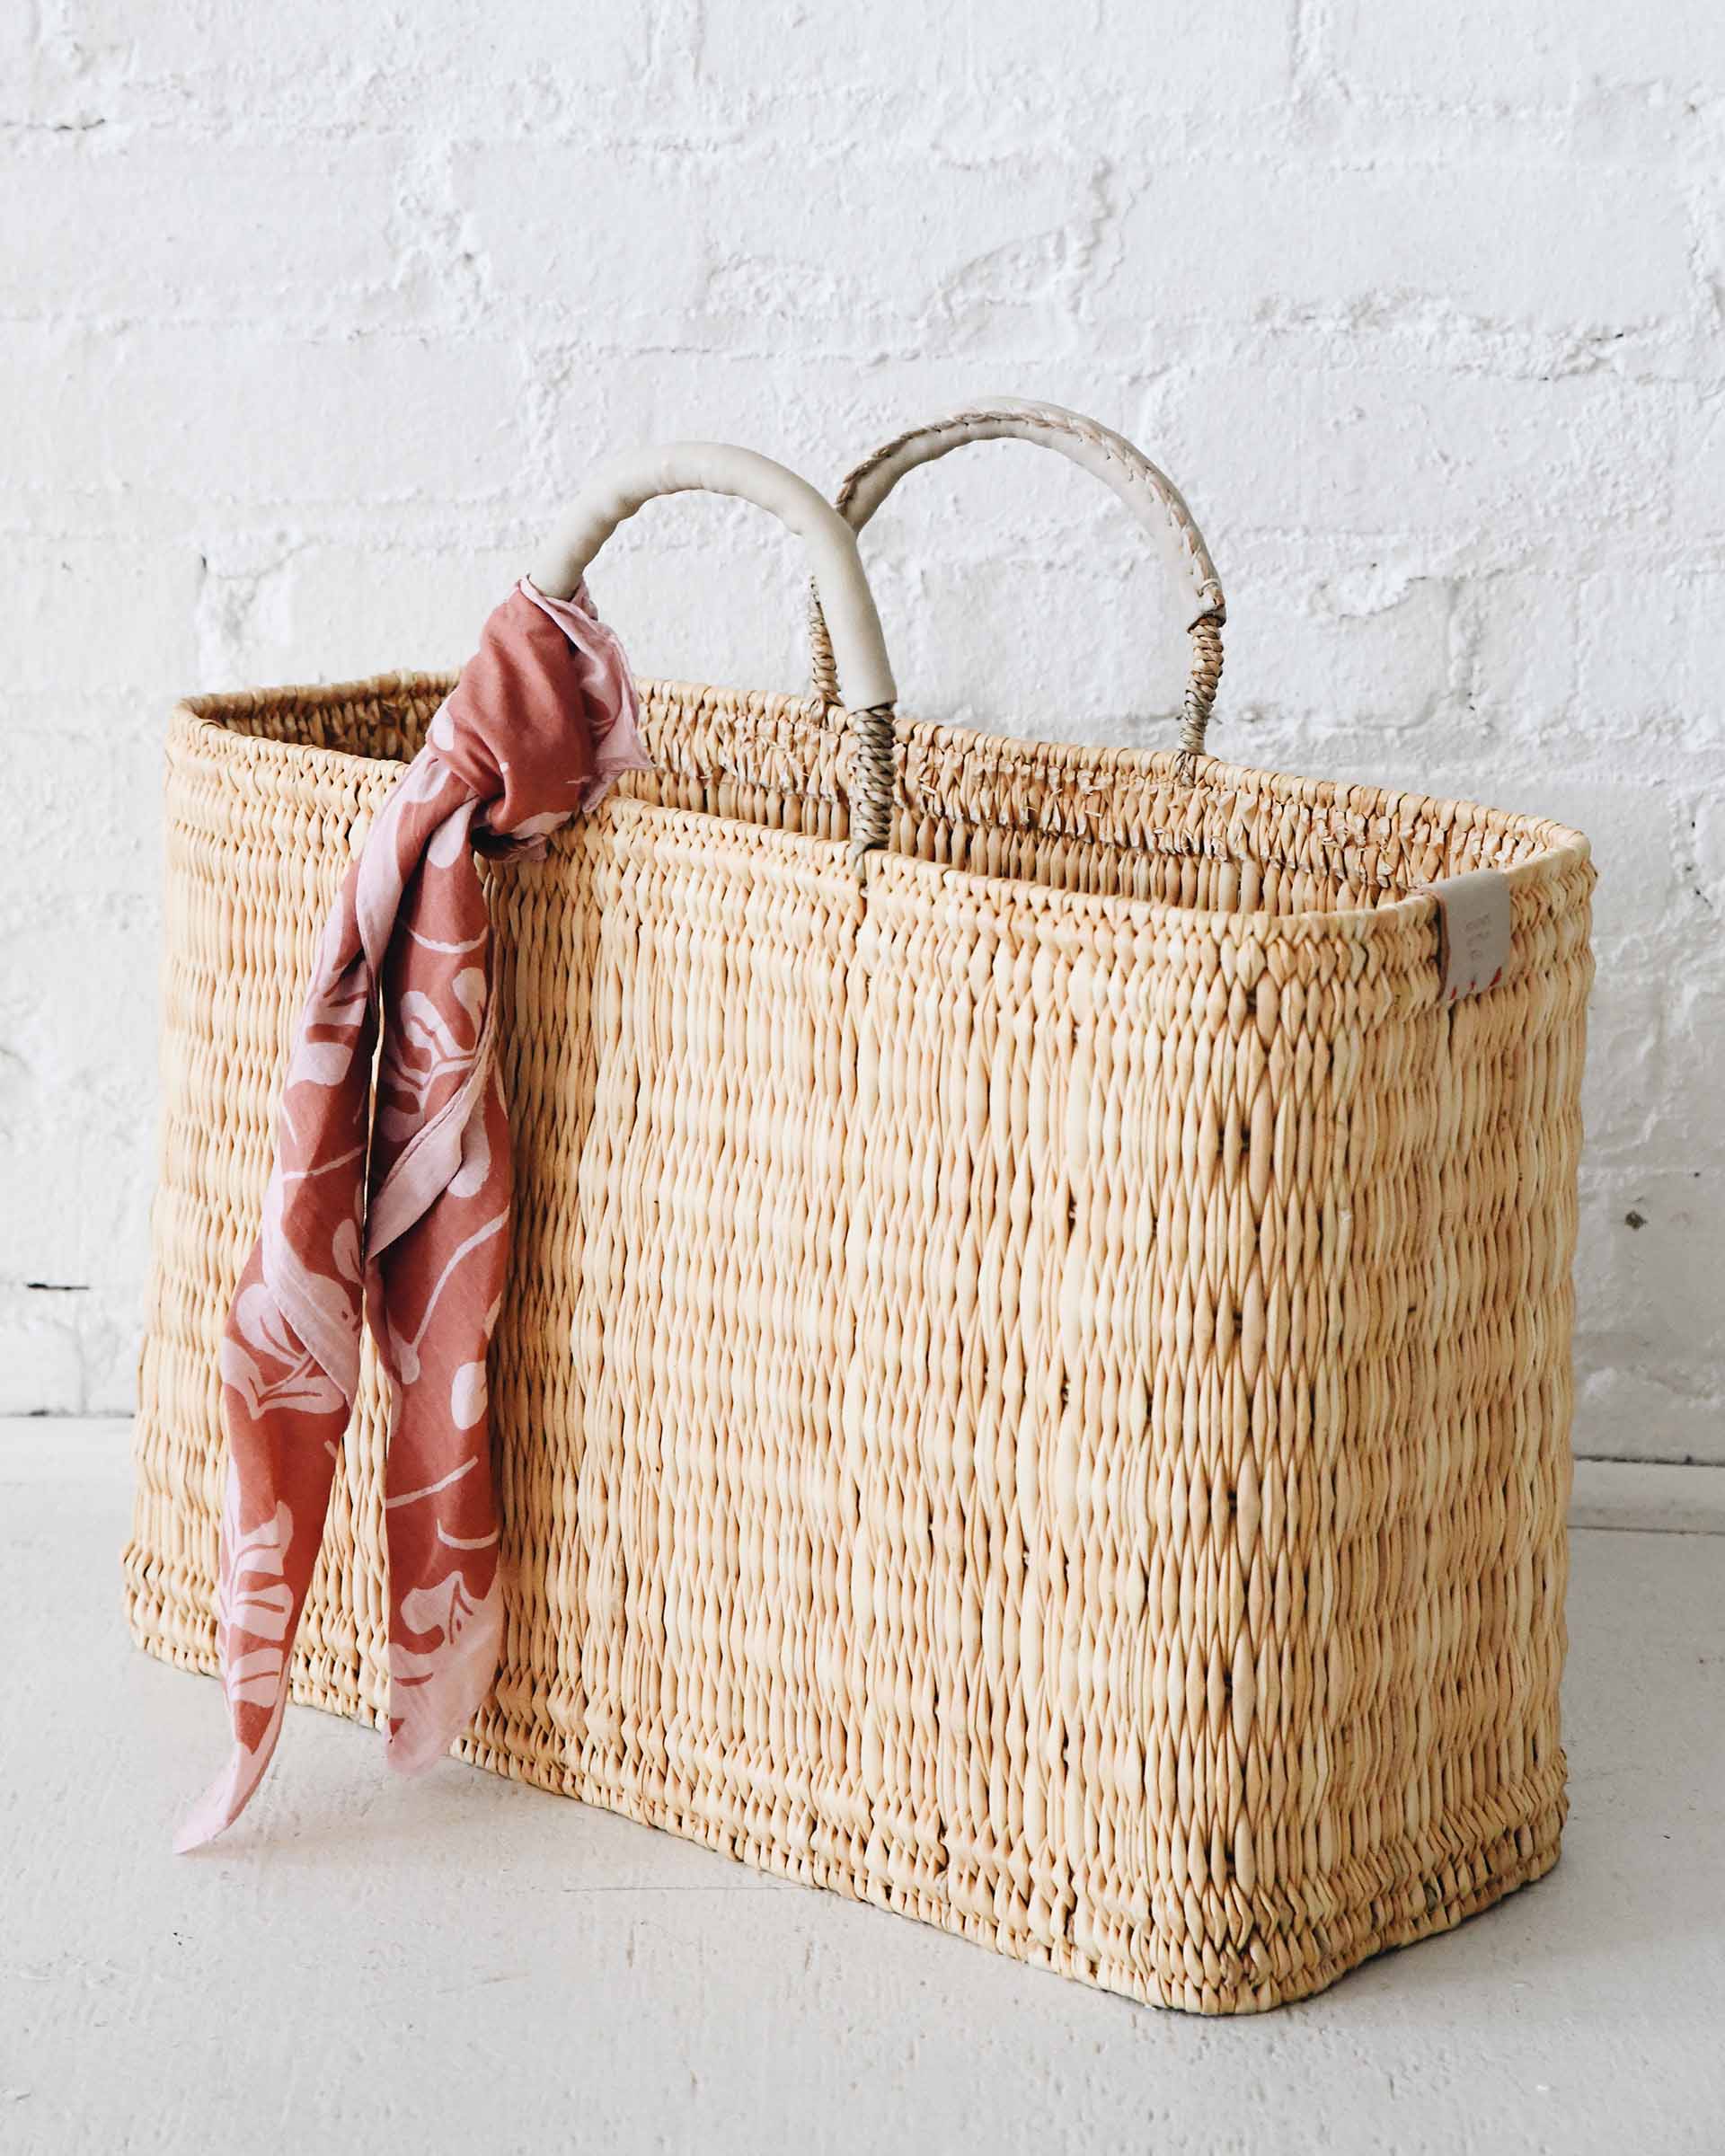 Large Medina market basket with off-white handles and details and pink scarf wrapped around the handle